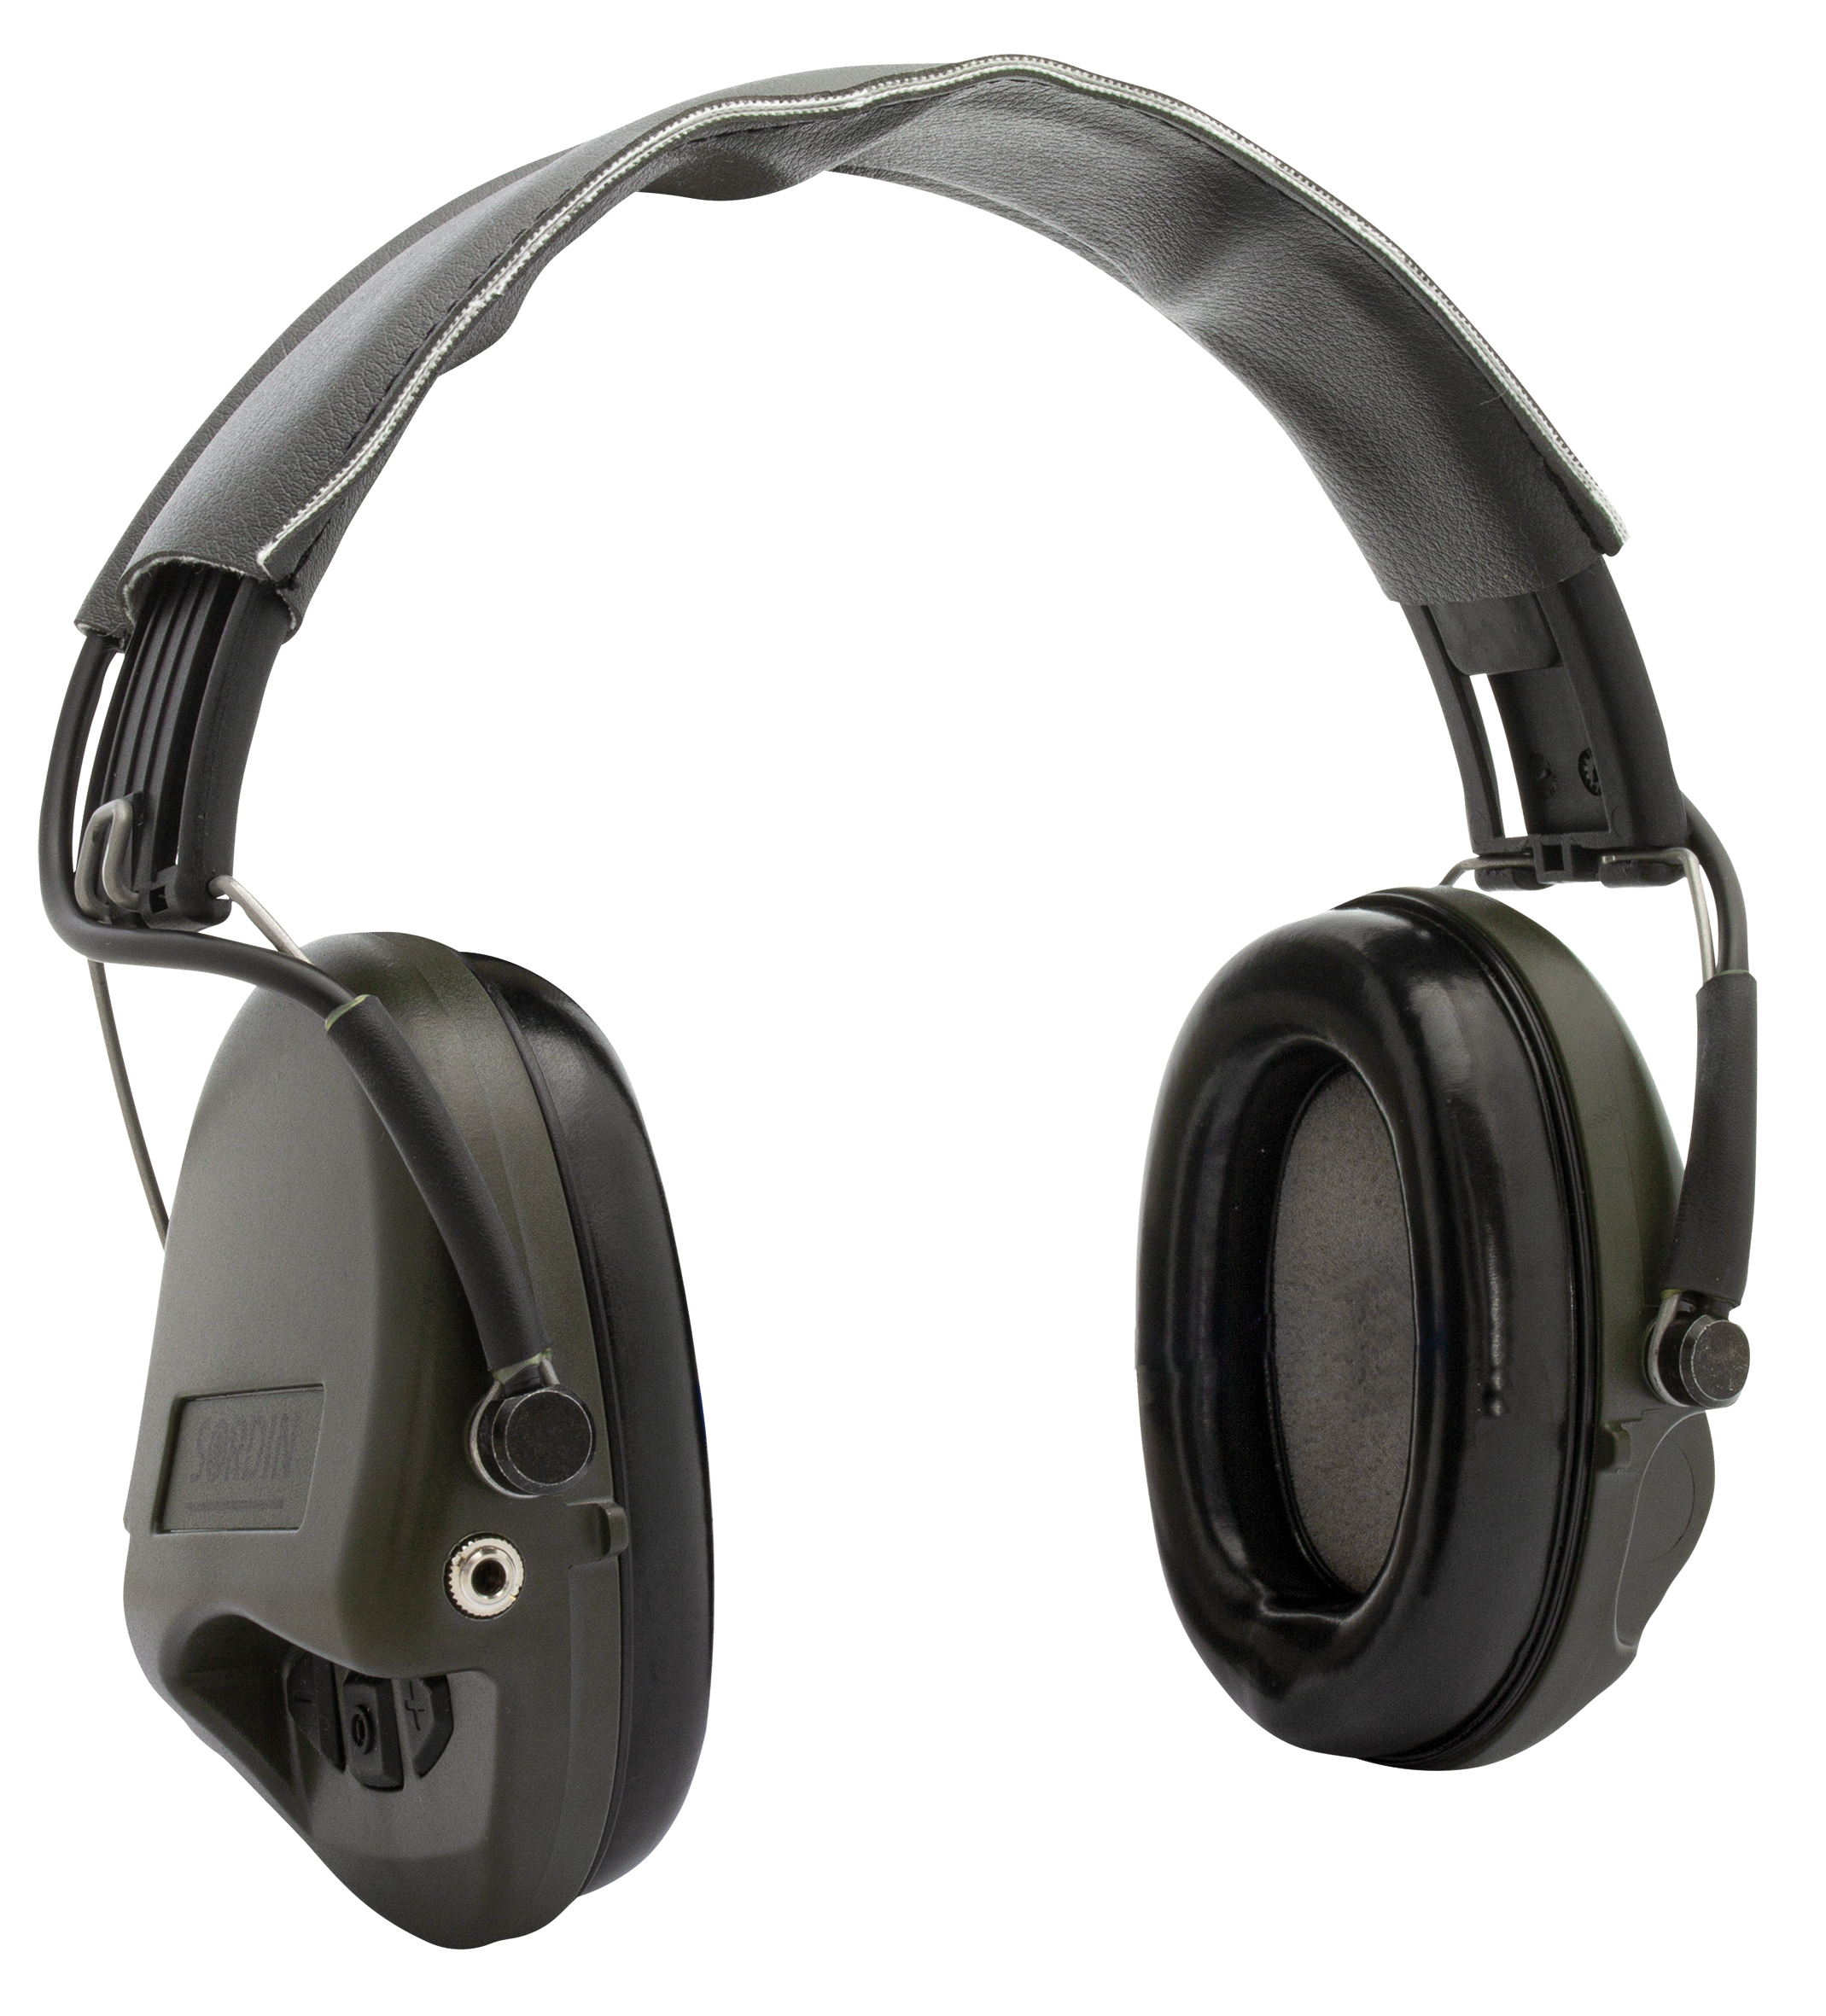 Electronic Earmuff Defenders Hearing Protection MSA Sordin Supreme BASIC with AUX Input and grey Leather-Band SOR75301